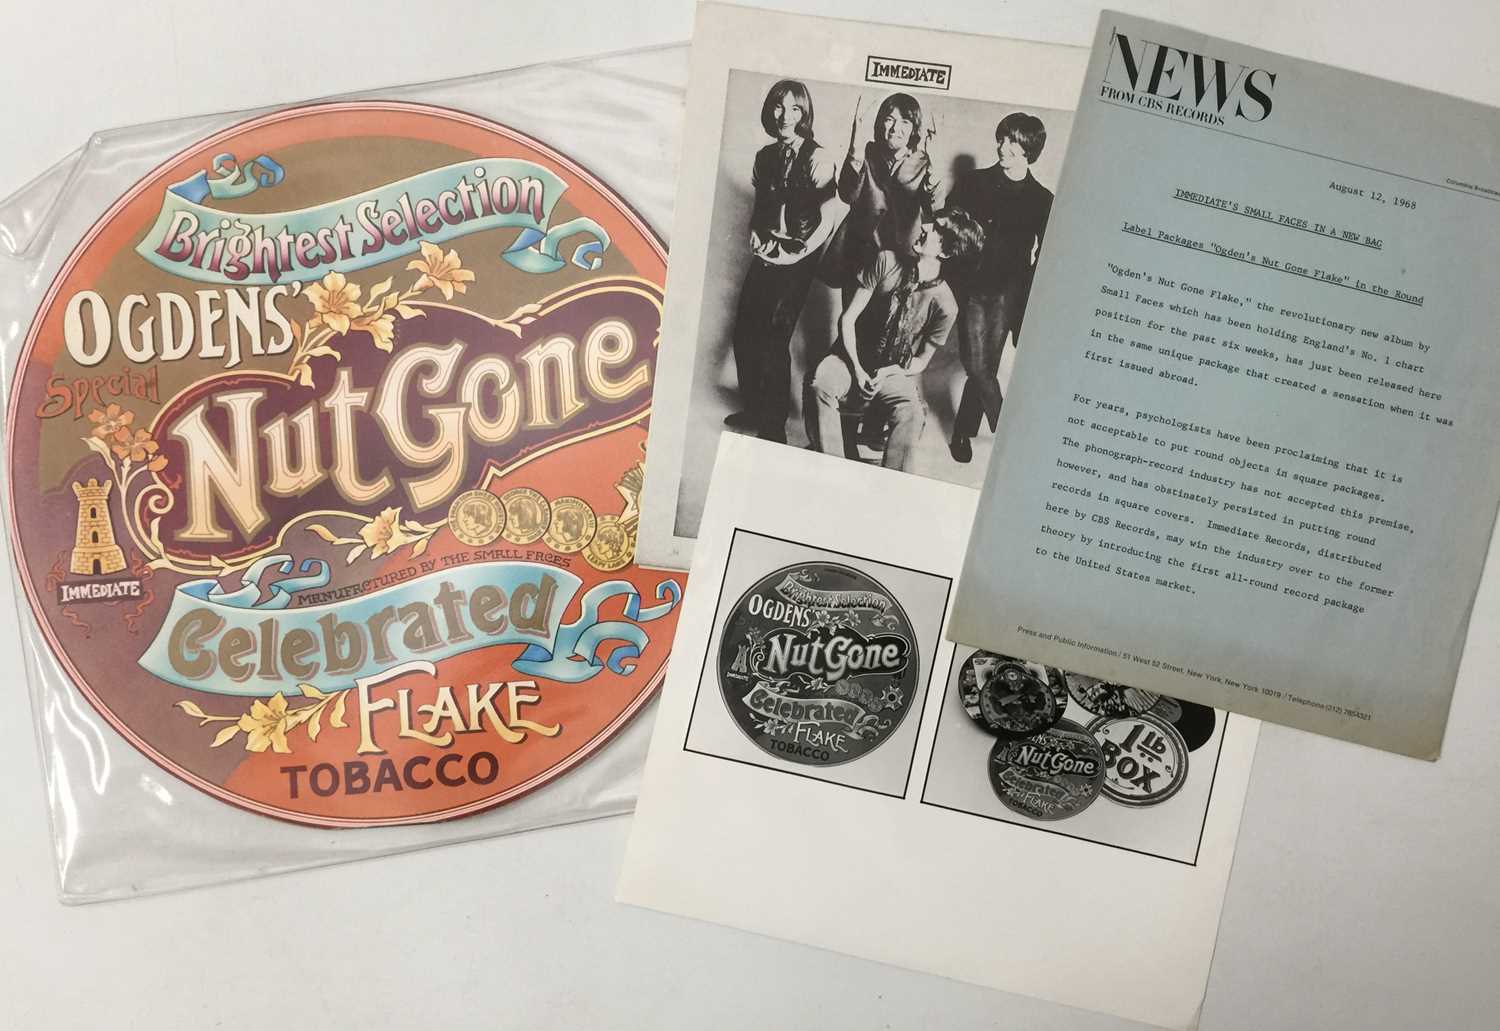 SMALL FACES - OGDEN'S NUT GONE FLAKE LP (EARLY PRESSING - IMSP 012)